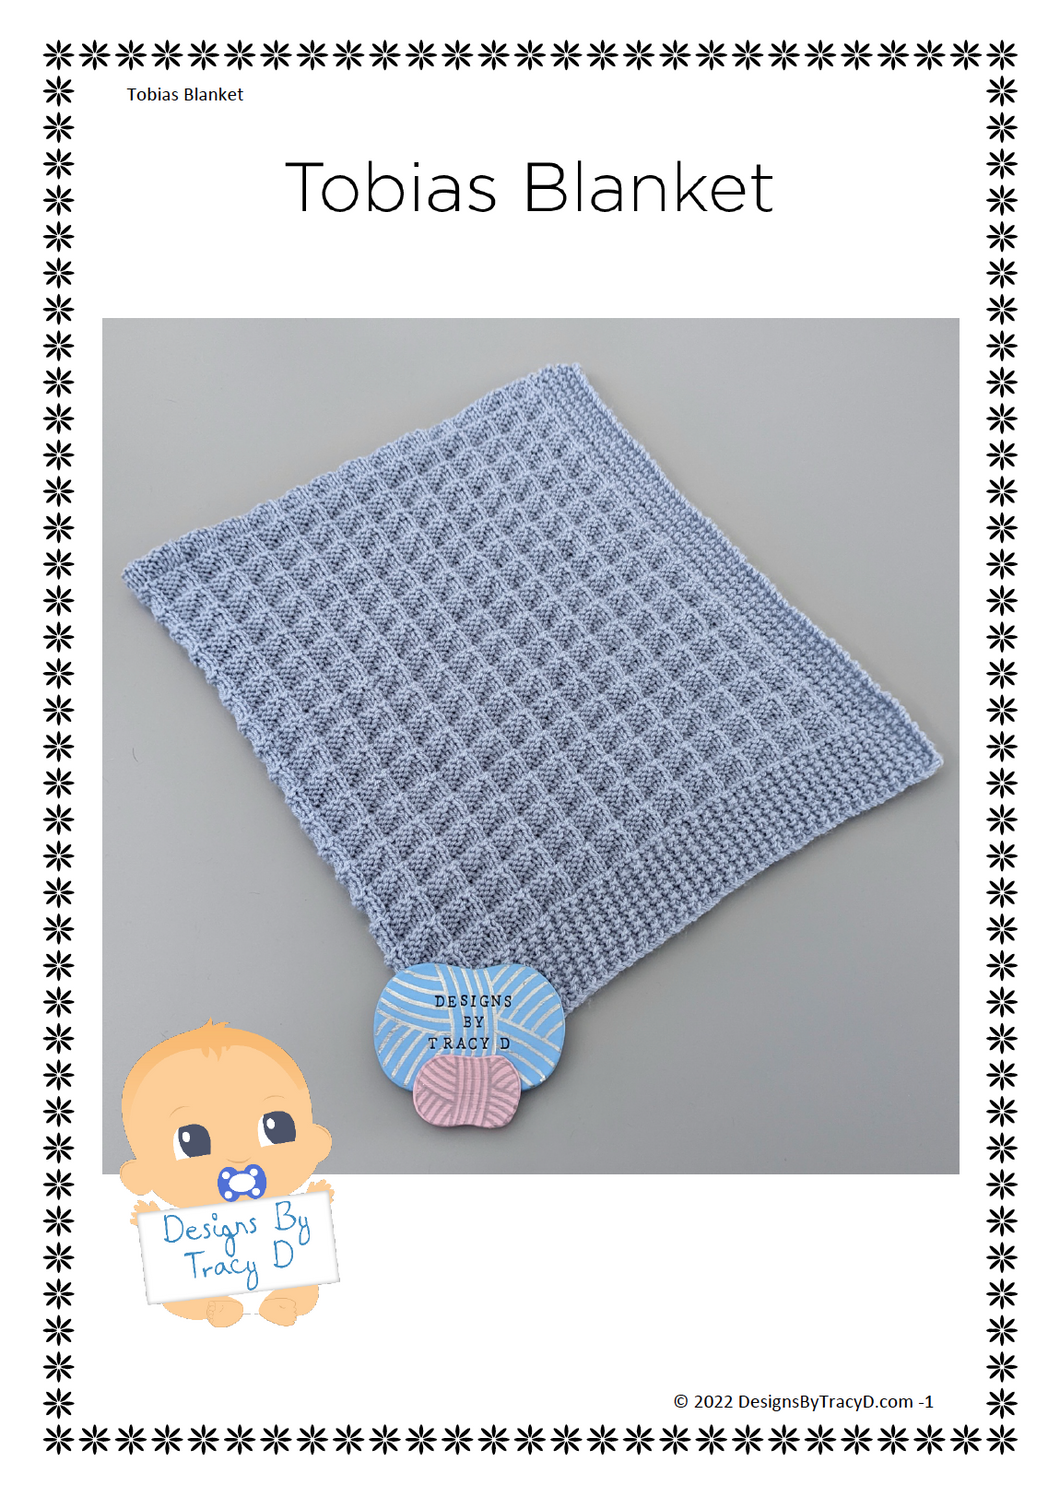 142 Tobias Blanket/pram cover- Posted - Designs By Tracy D